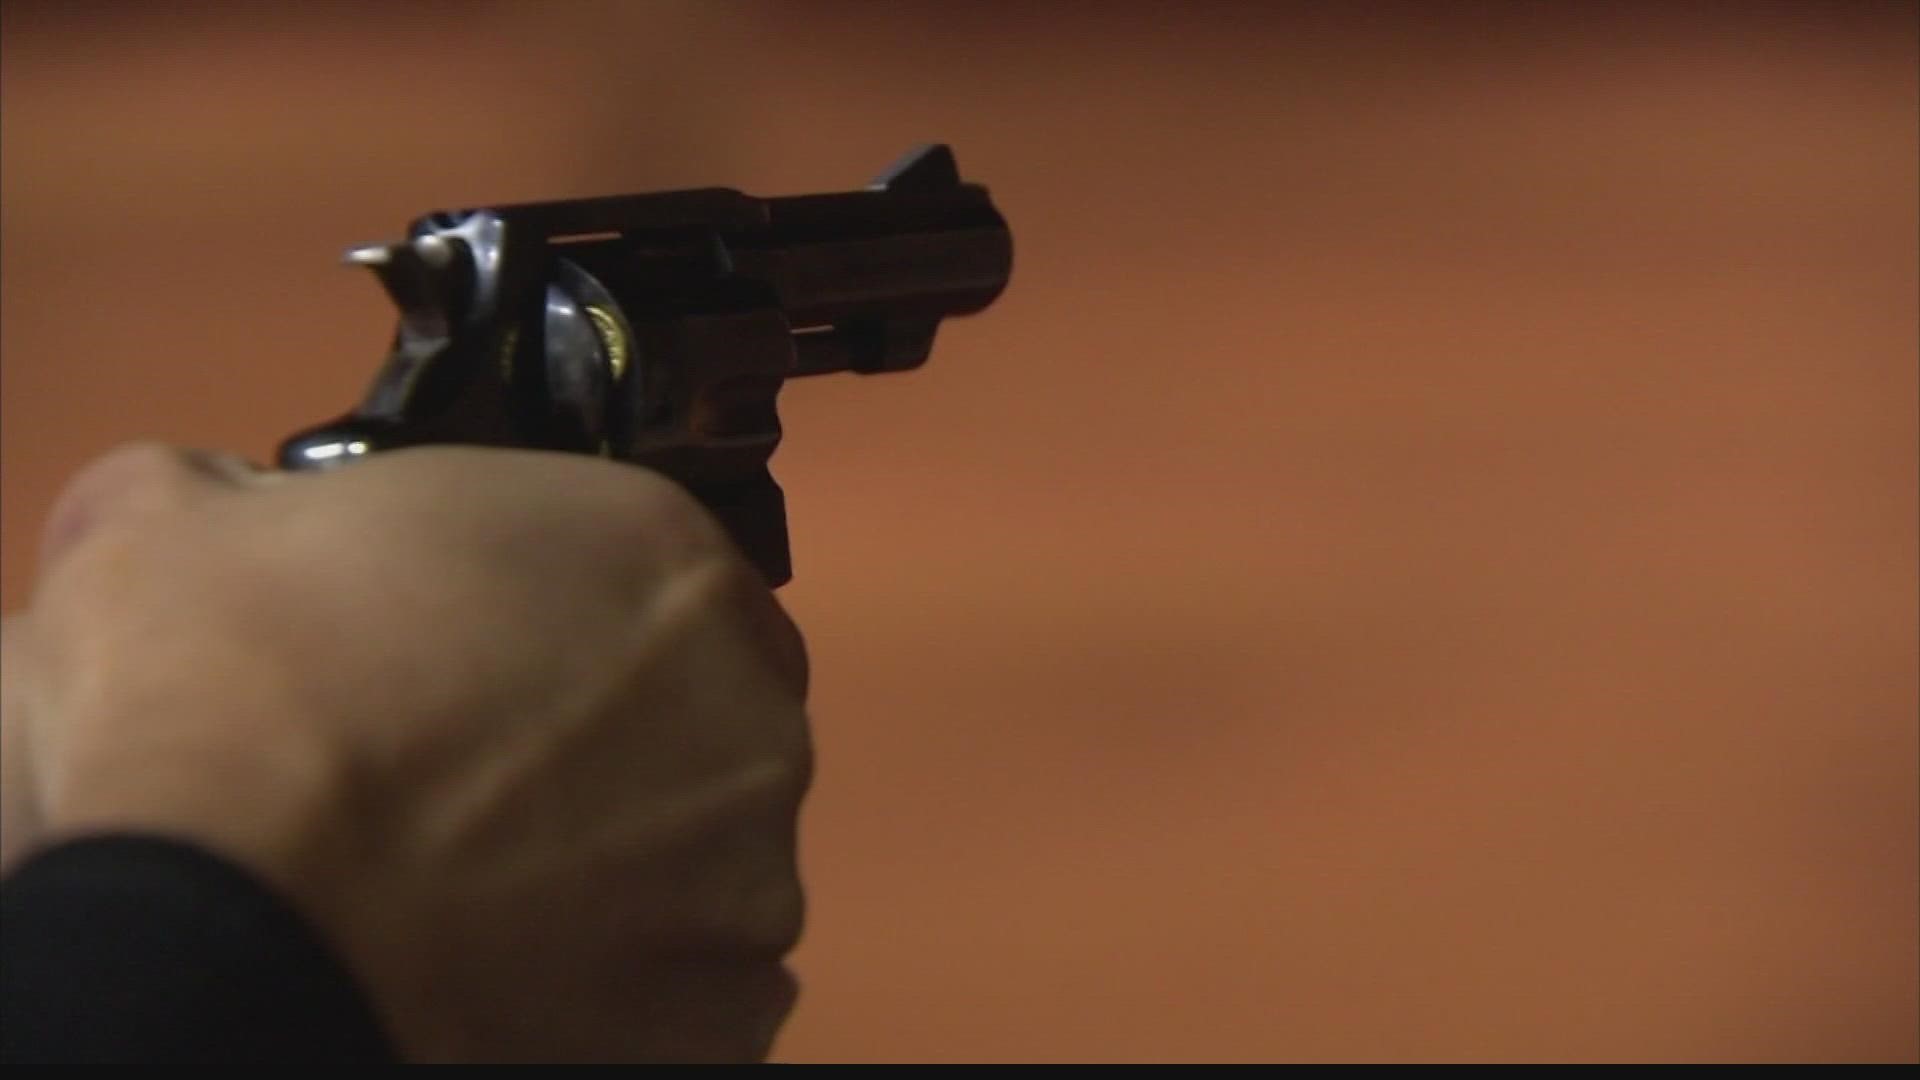 Soon in Indiana, gun owners may be able to carry guns without a permit. 13 Investigates' Ciera Putnam breaks down how this bill was resurrected.